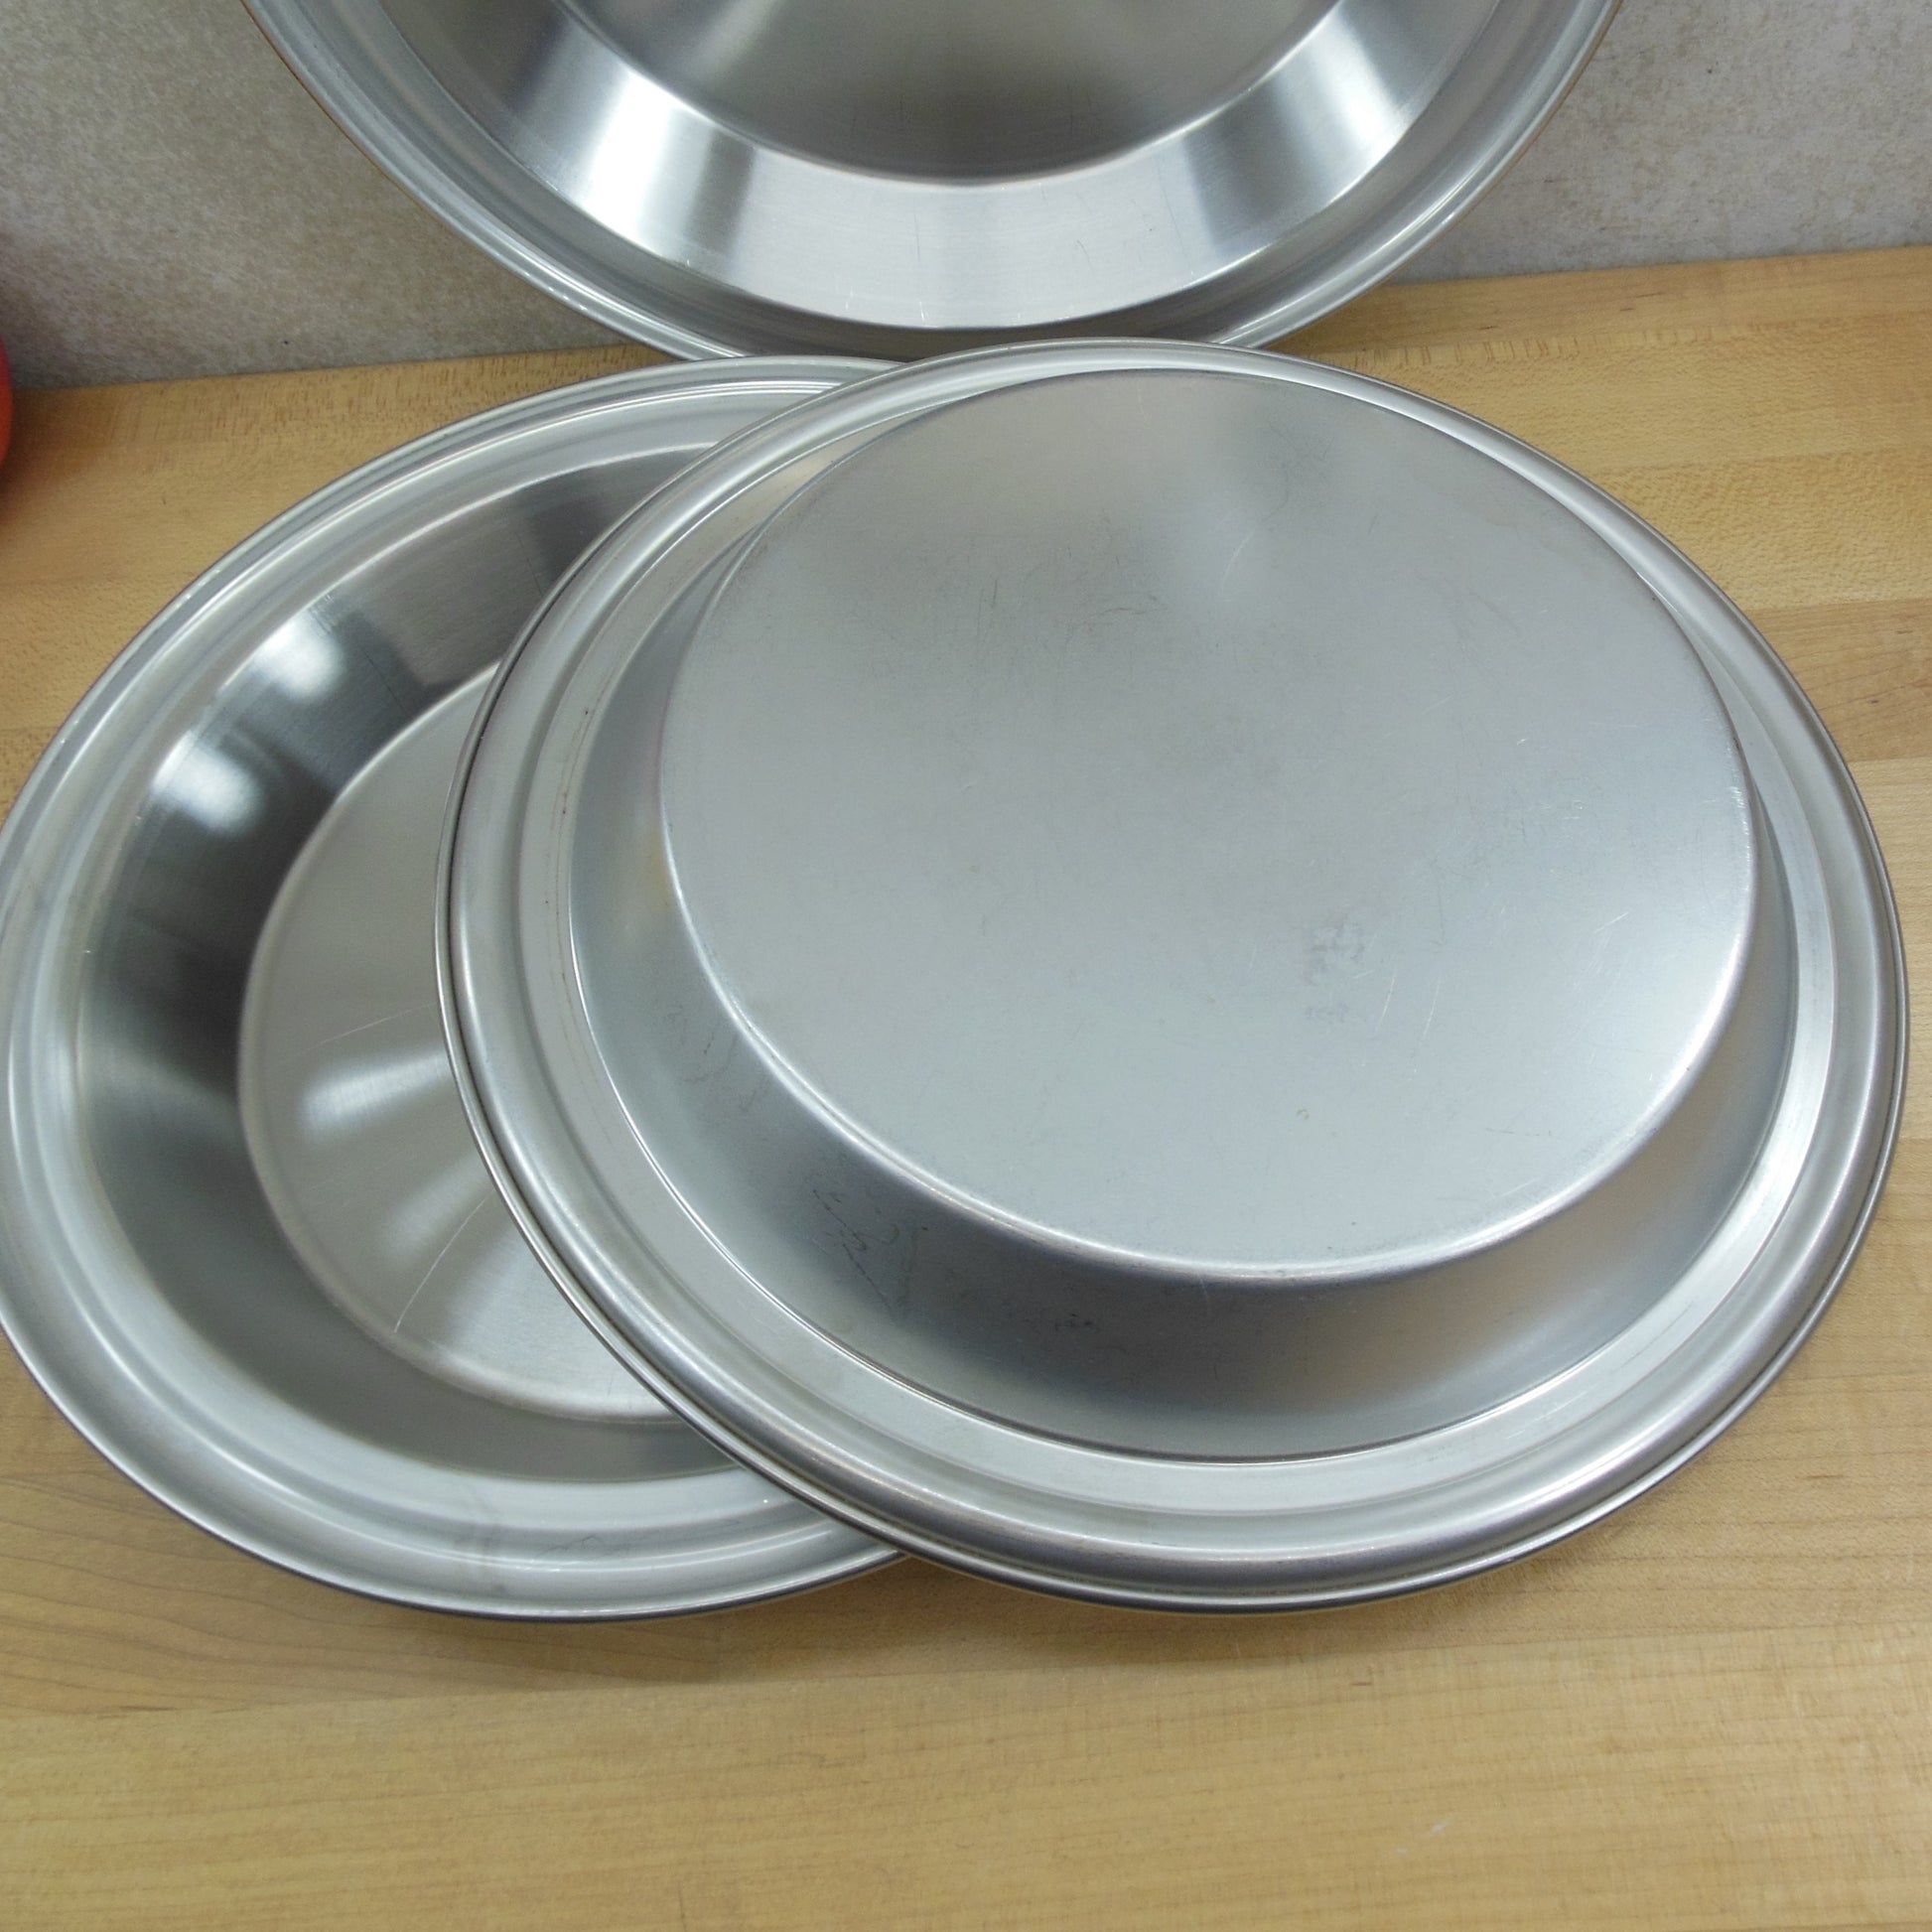 Unbranded Trio No Drip Edge Stainless Steel Pie Pan Plates 9" x 1-1/2" or 11" used